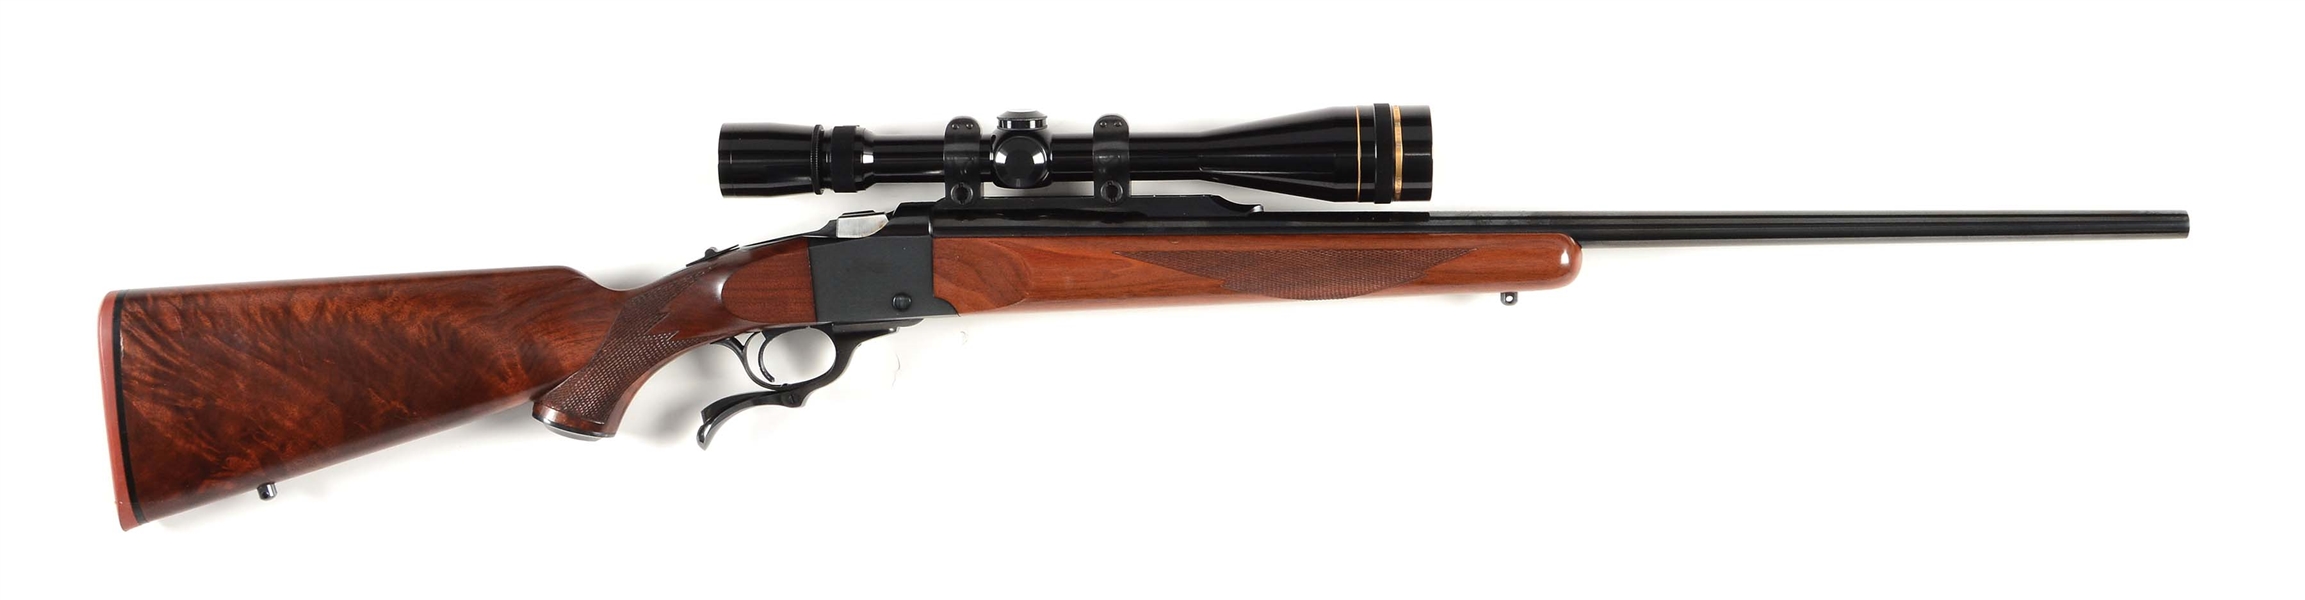 (M) CLASSIC RUGER NO. 1 SINGLE SHOT SPORTING RIFLE.